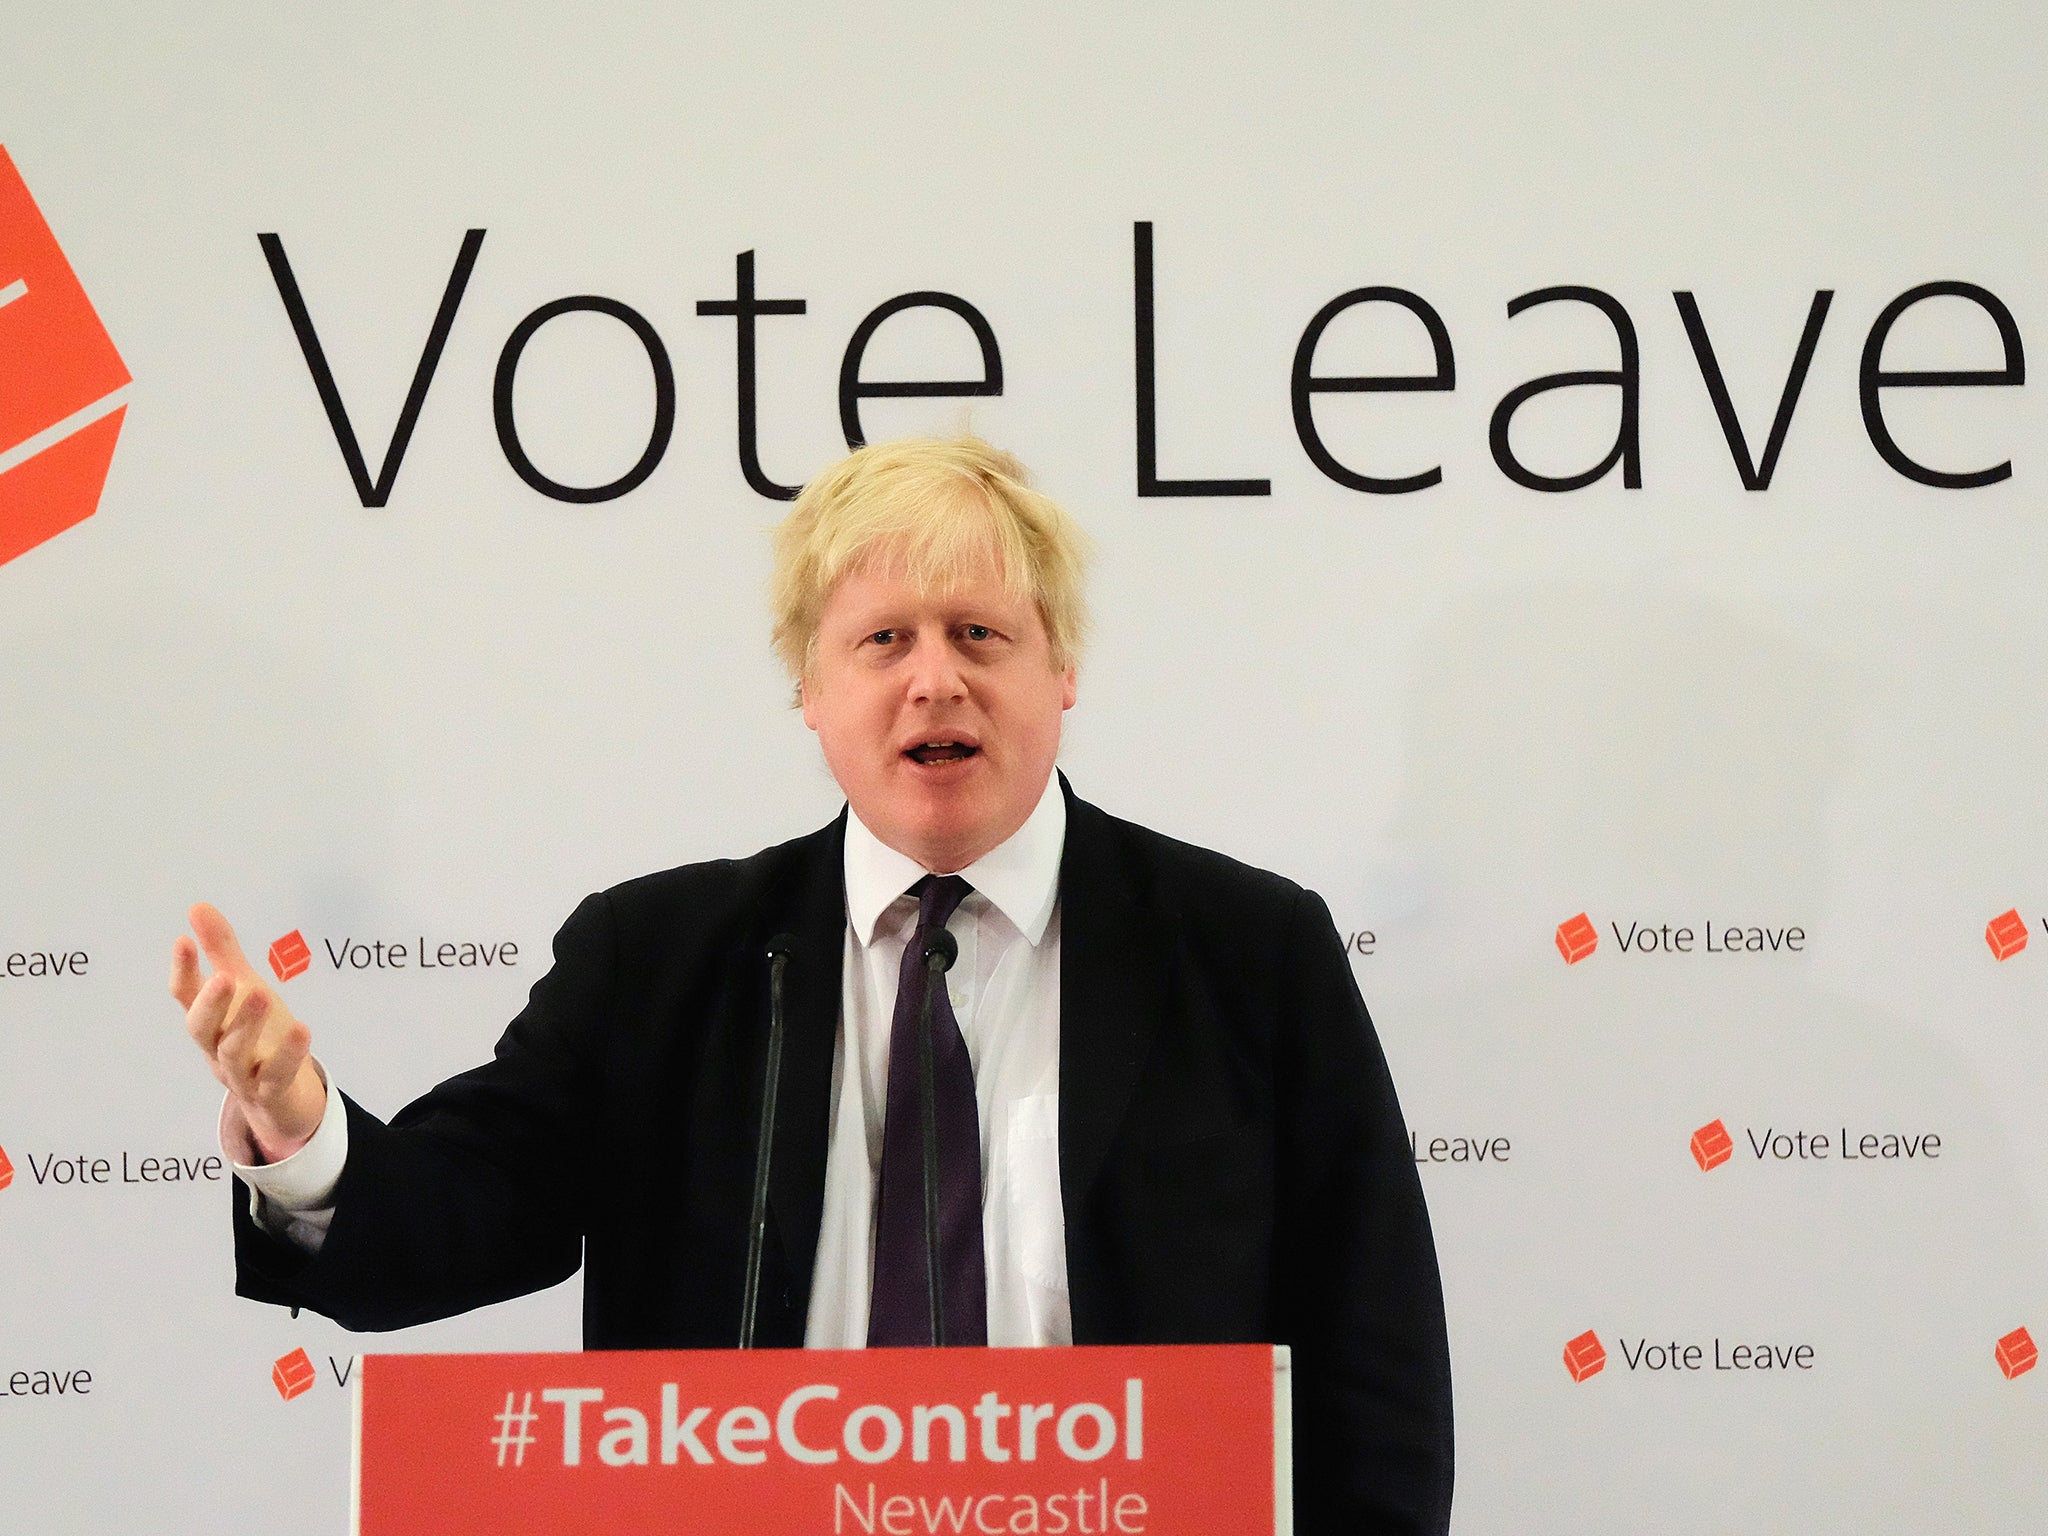 Boris Johnson said the bill for staying in the EU would increase